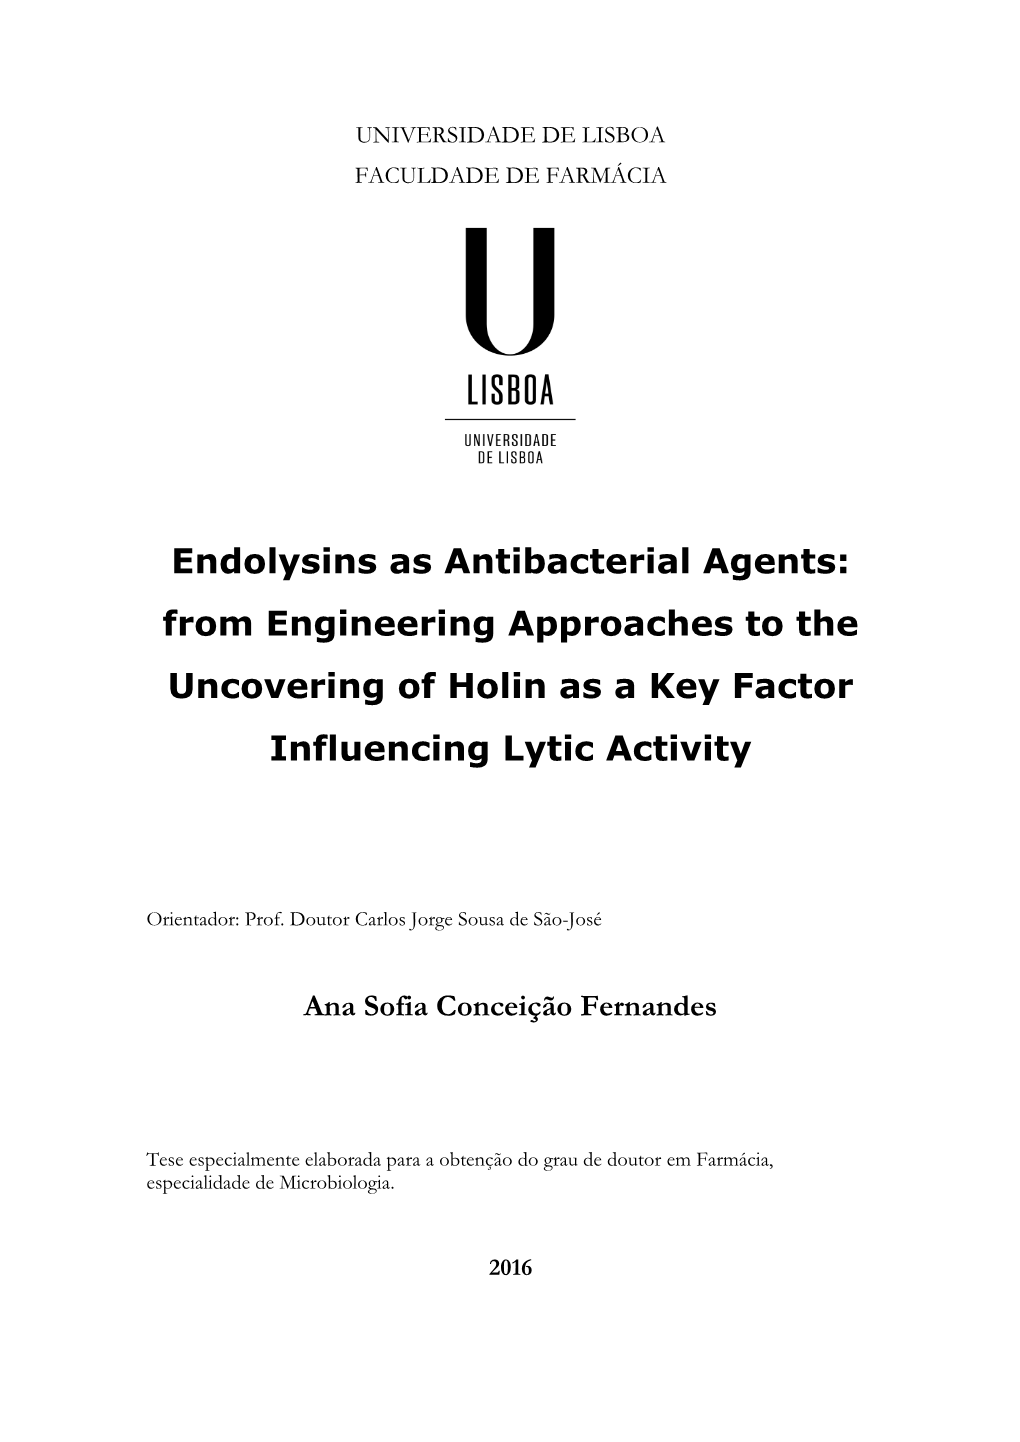 Endolysins As Antibacterial Agents: from Engineering Approaches to the Uncovering of Holin As a Key Factor Influencing Lytic Activity